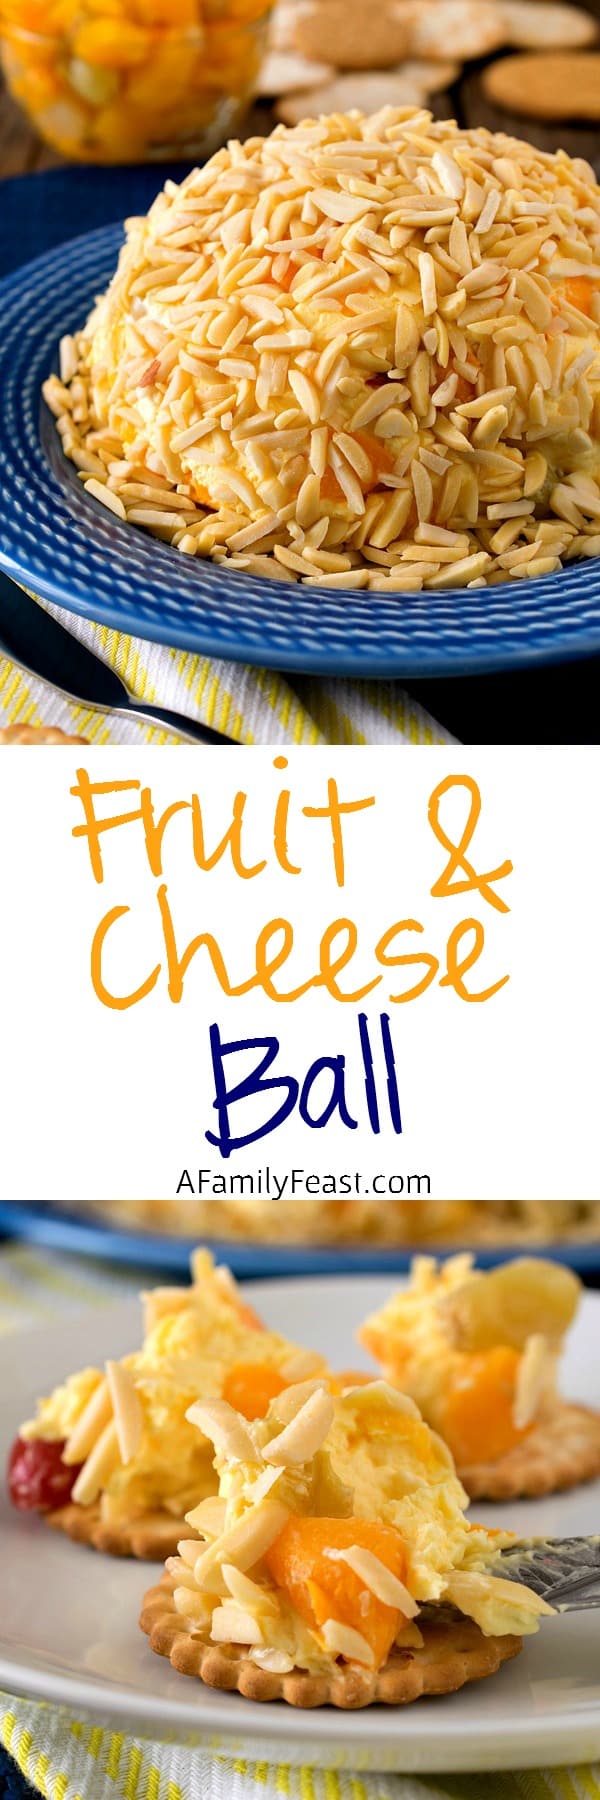 Fruit and Cheese Ball - A Family Feast